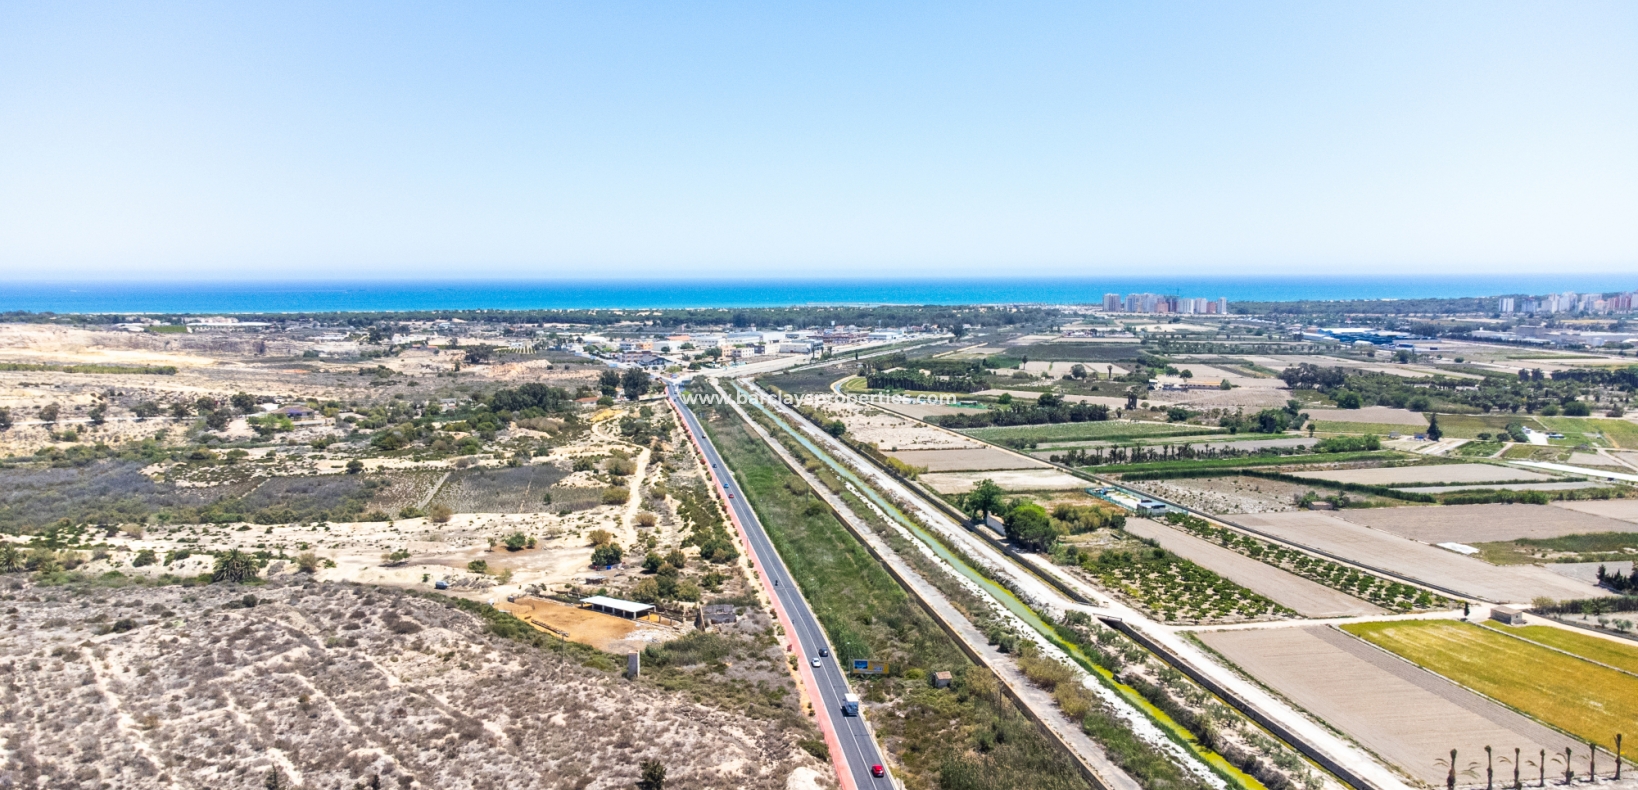 Plot of land for sale costa blanca